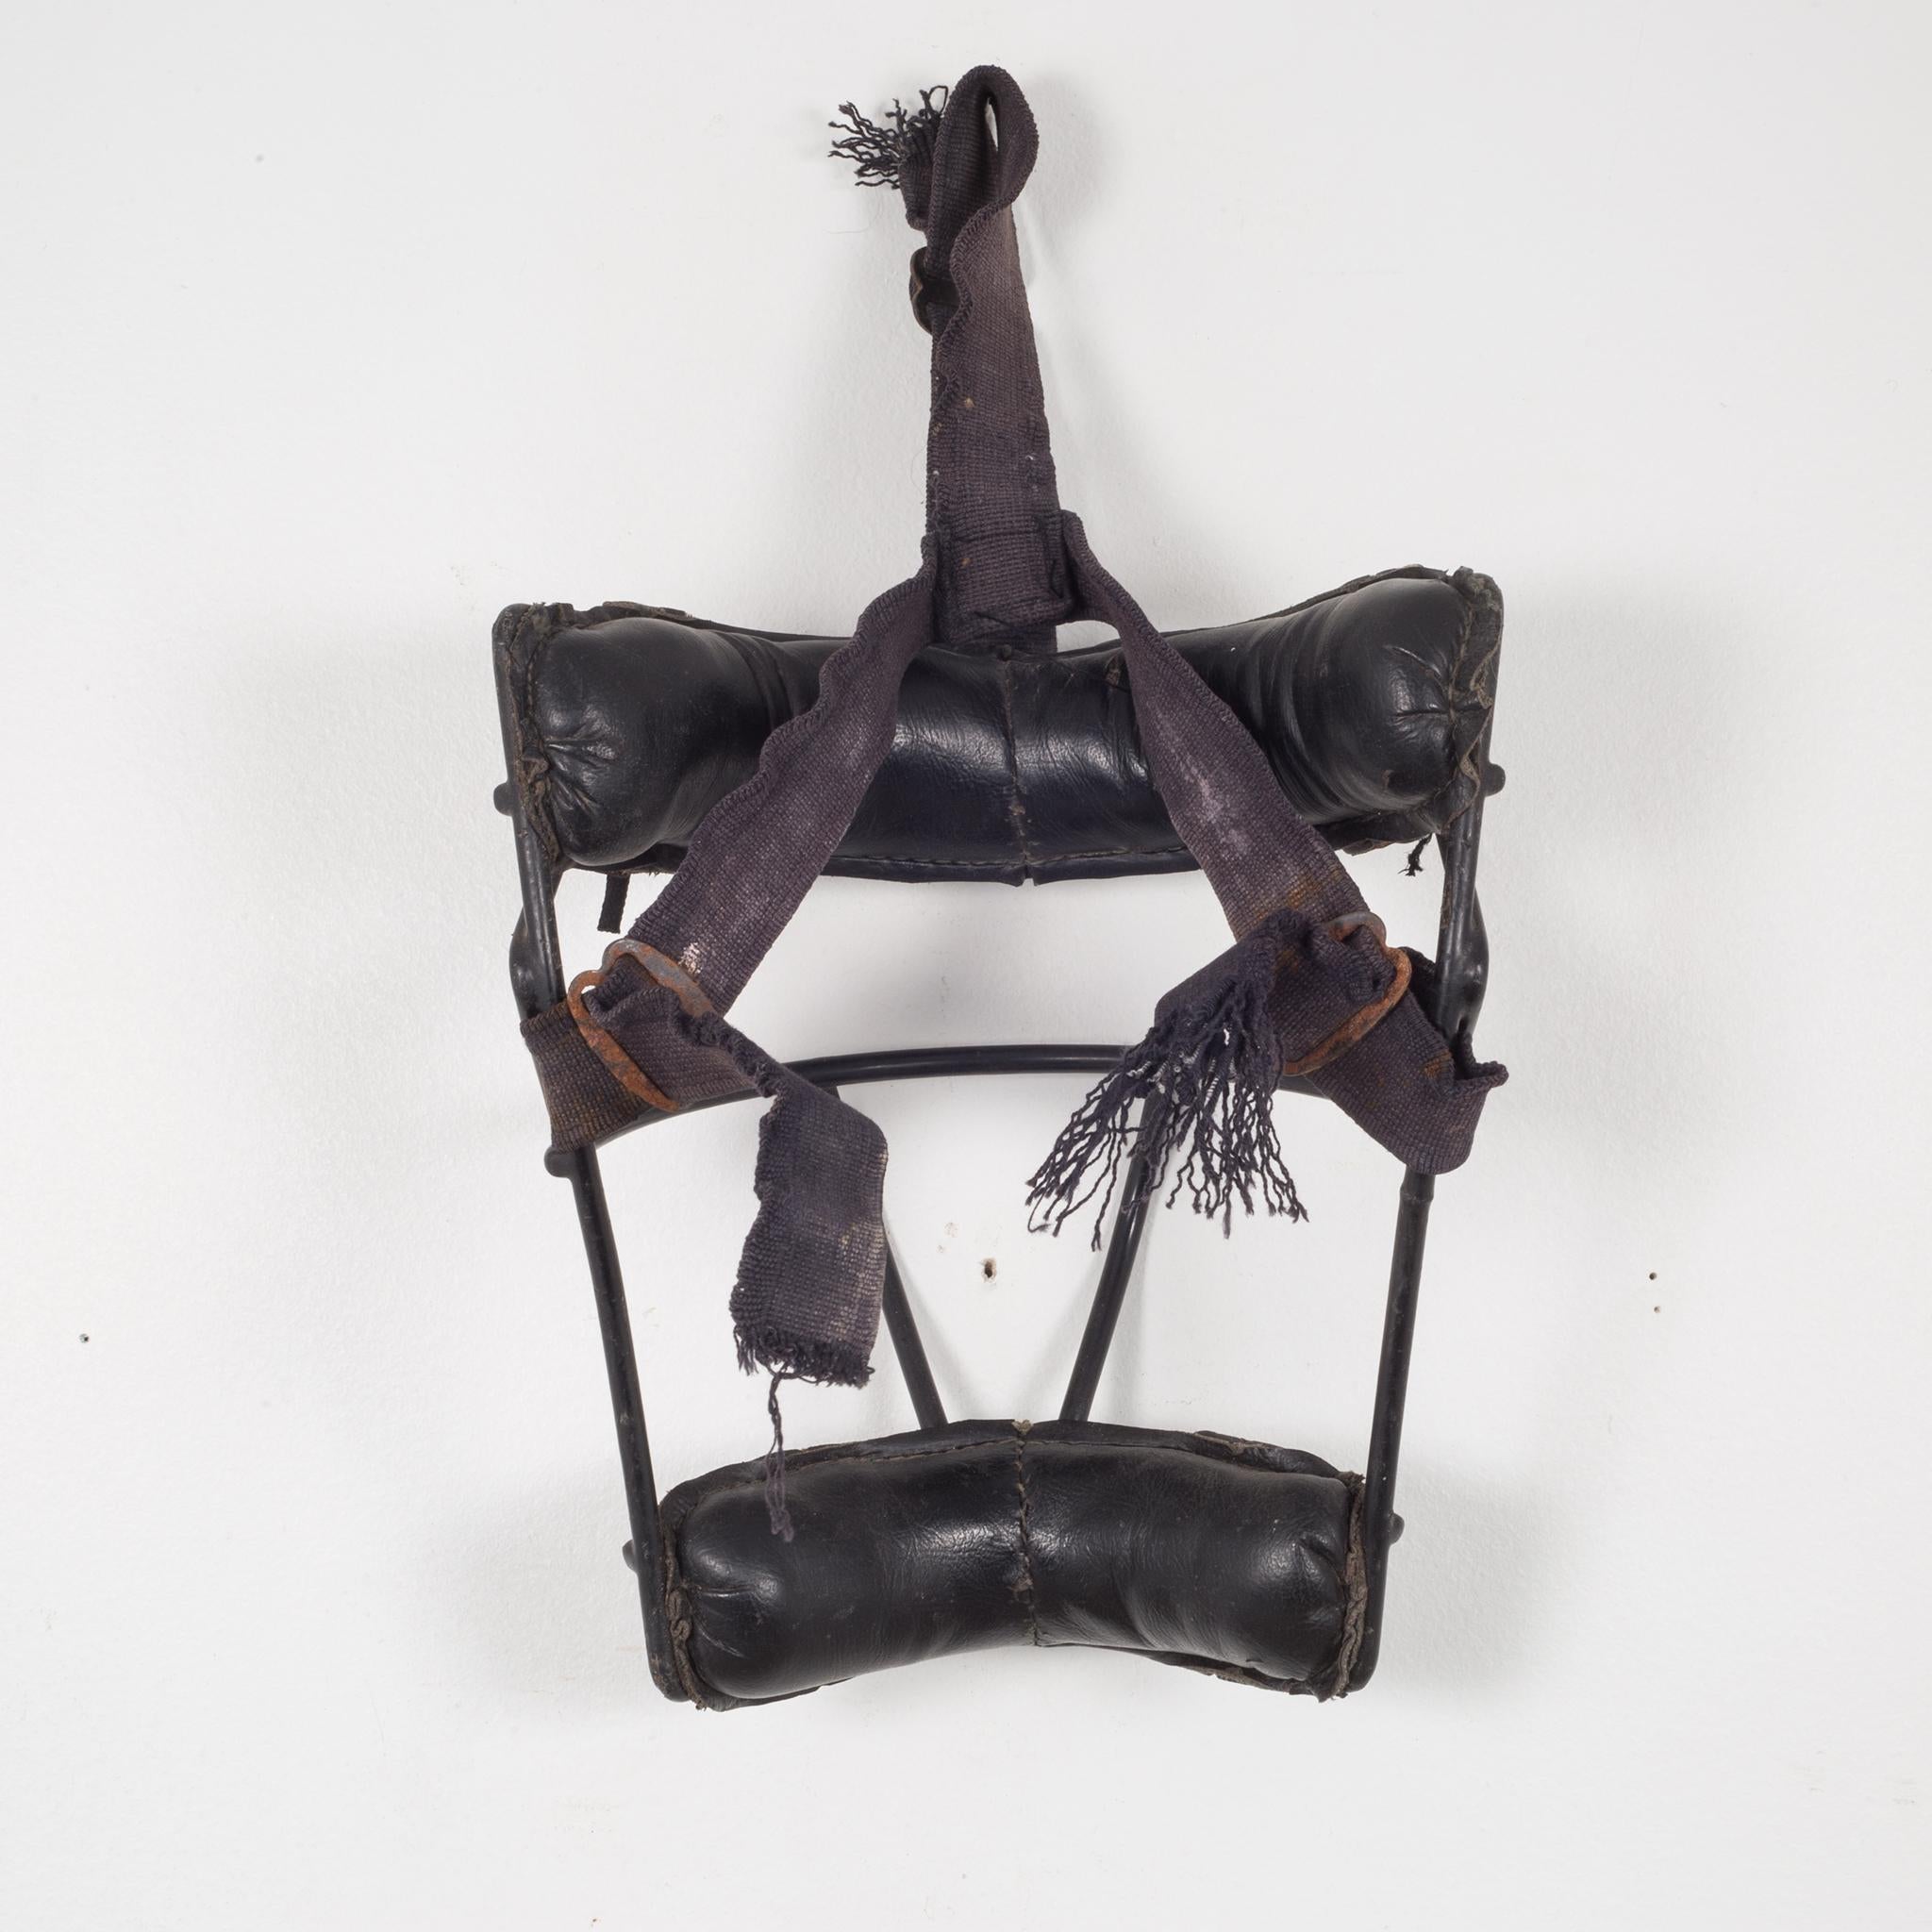 About

This is an original vintage catcher's mask. The main body is metal with thick leather padding. The piece has retained most of its original finish and is in good condition with appropriate patina for its age.

Creator: Unknown.
Date of